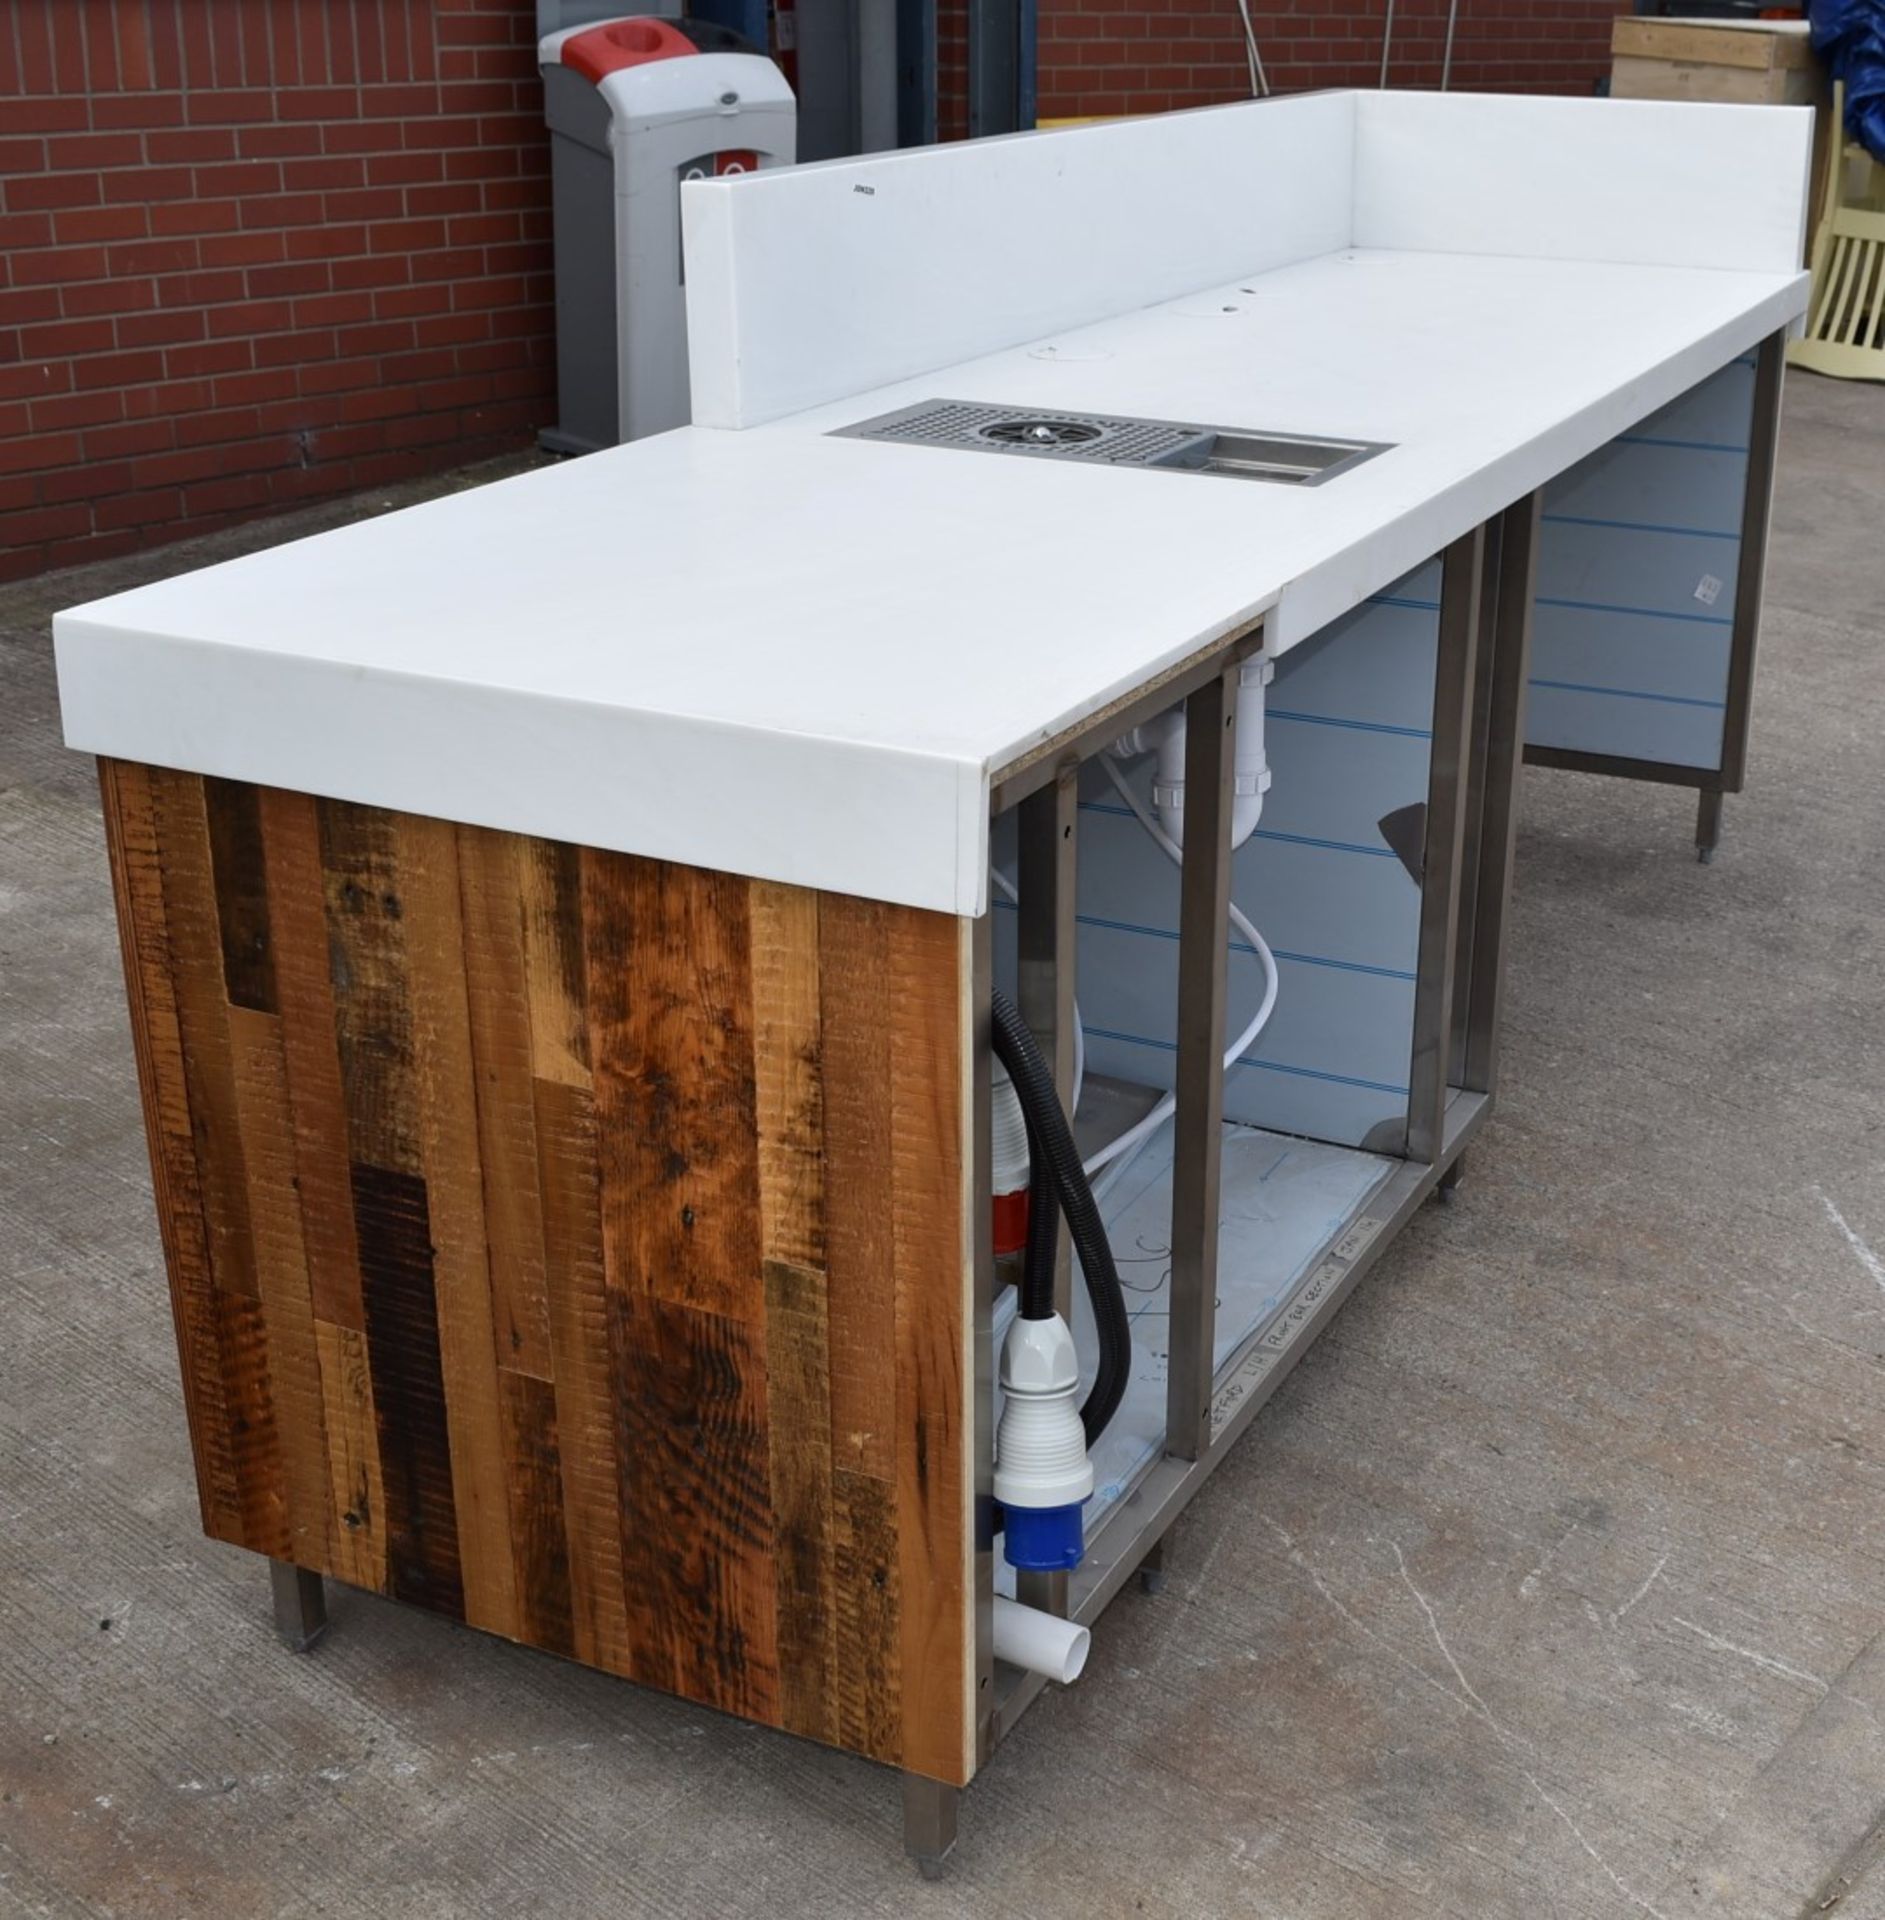 1 x Commercial Coffee Shop Preperation Counter With Natural Wooden Fascia, Hard Wearing Hygenic - Image 16 of 20